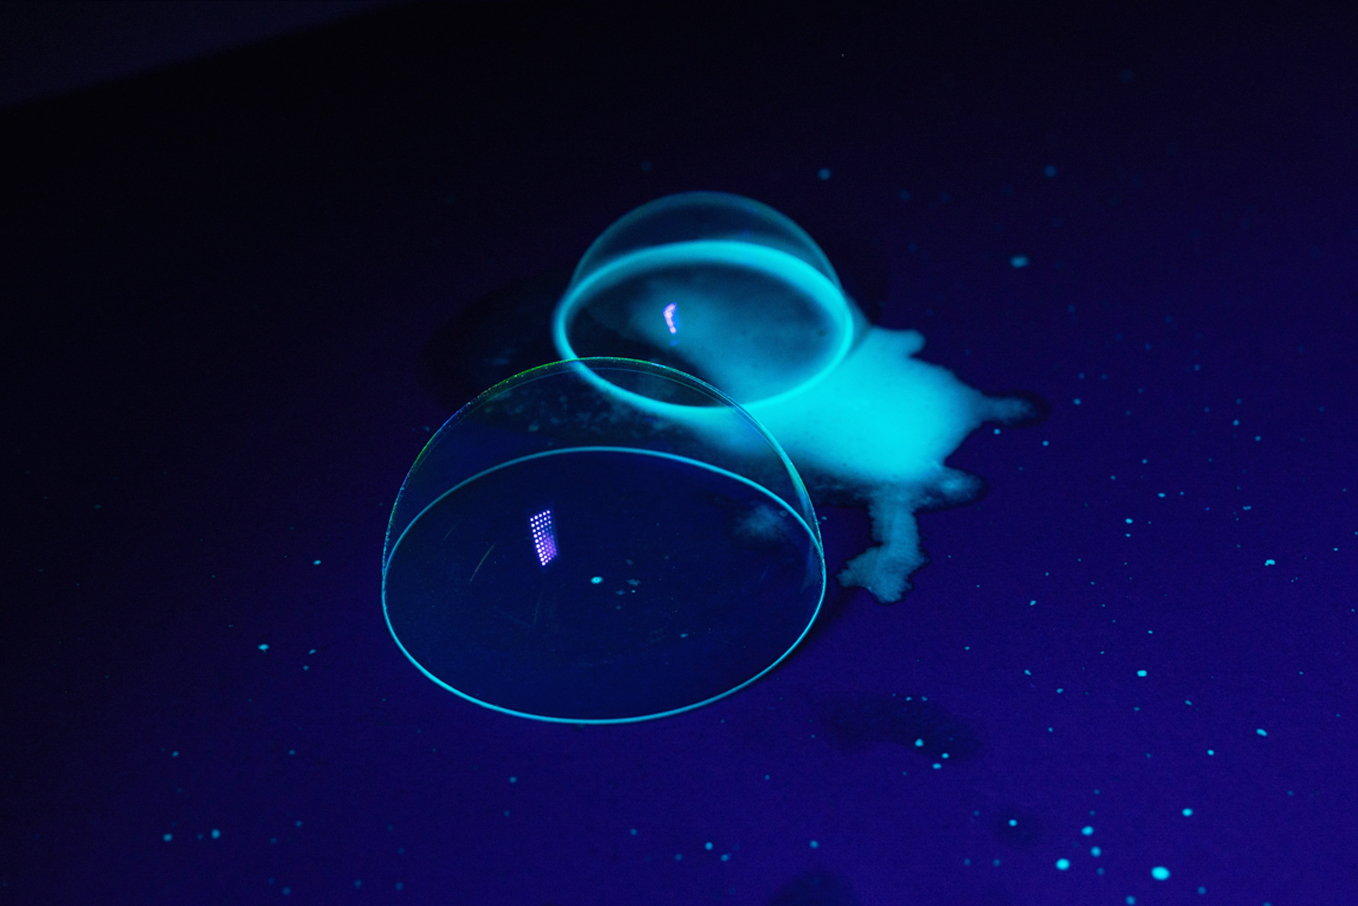 Two glow-in-the-dark soap bubbles under UV light on a table.